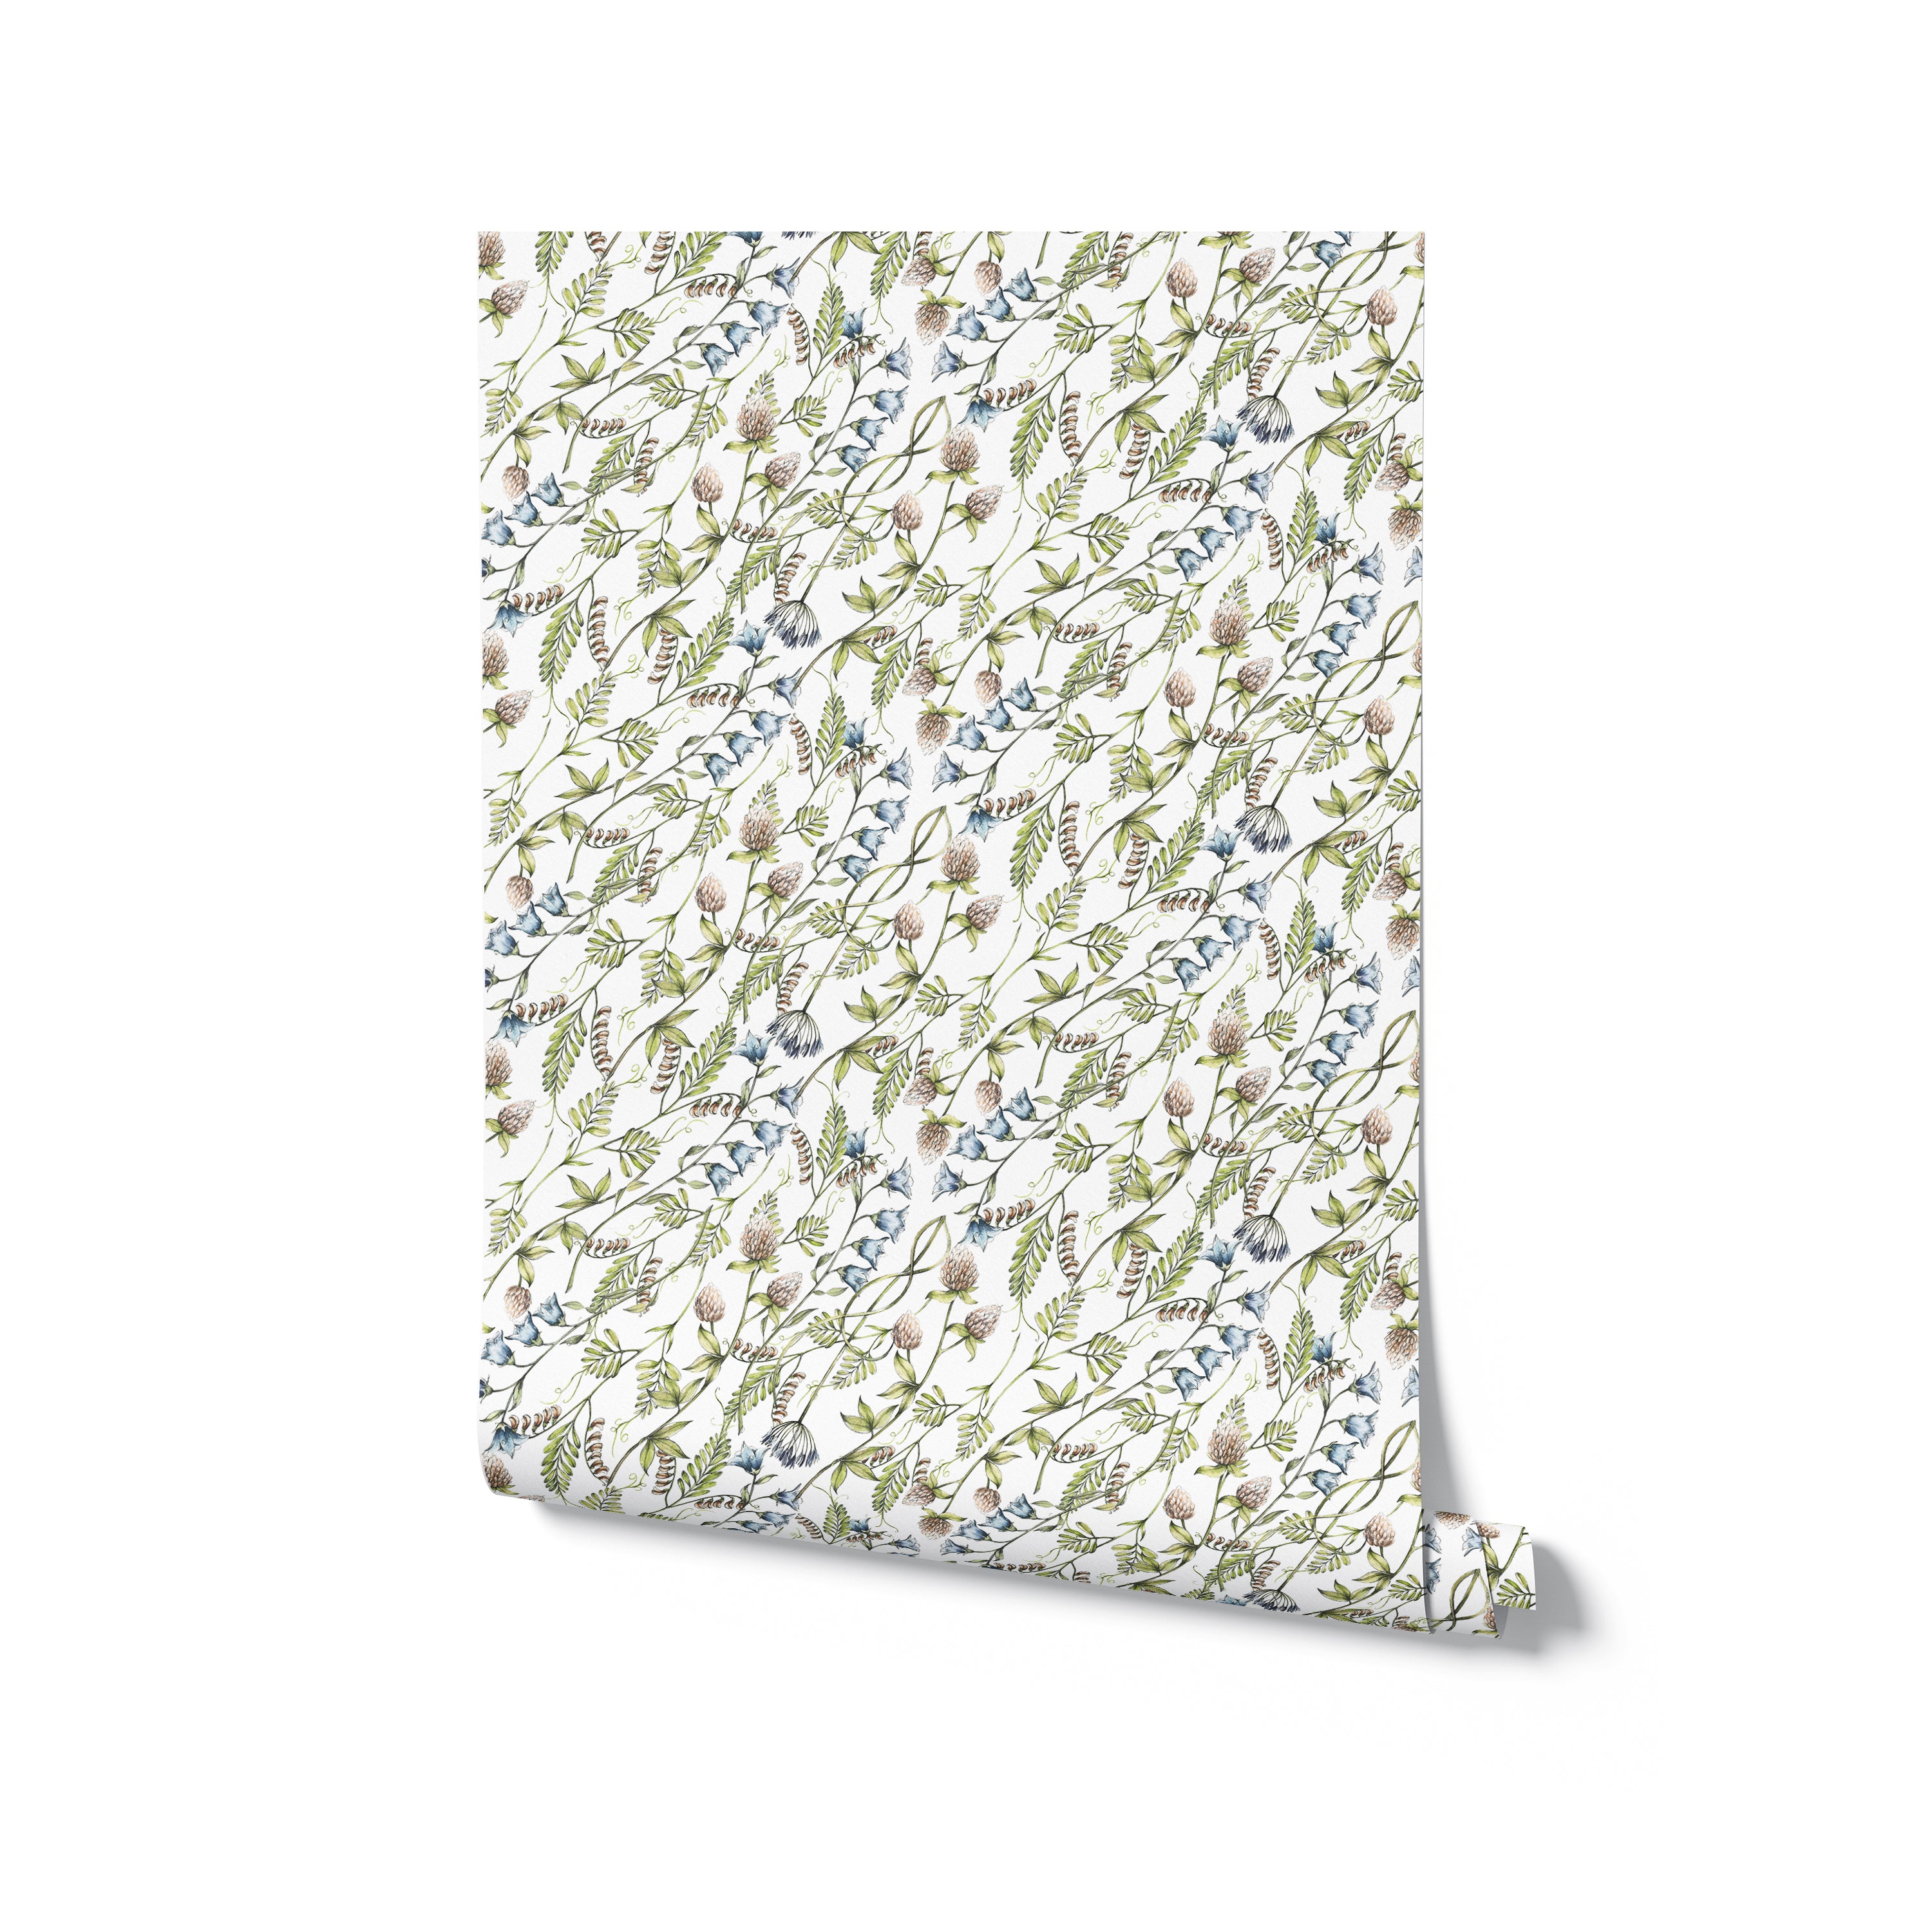 A roll of 'Watercolour Botanical Wildflowers' wallpaper, depicting its intricate design of various wildflowers and foliage in watercolor style. The wallpaper has a white background and features a palette of blues, greens, and beige, ready to transform a space with its elegant botanical theme